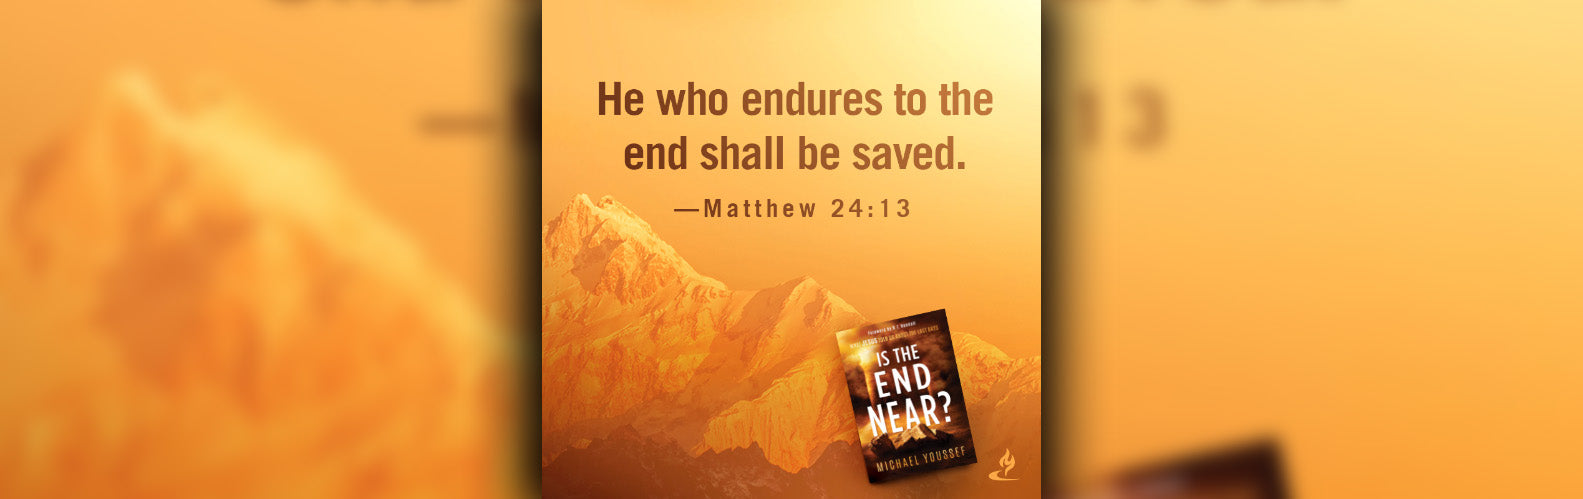 Dr. Michael Youssef shares Jesus’ message of hope about His end times return in riveting new book